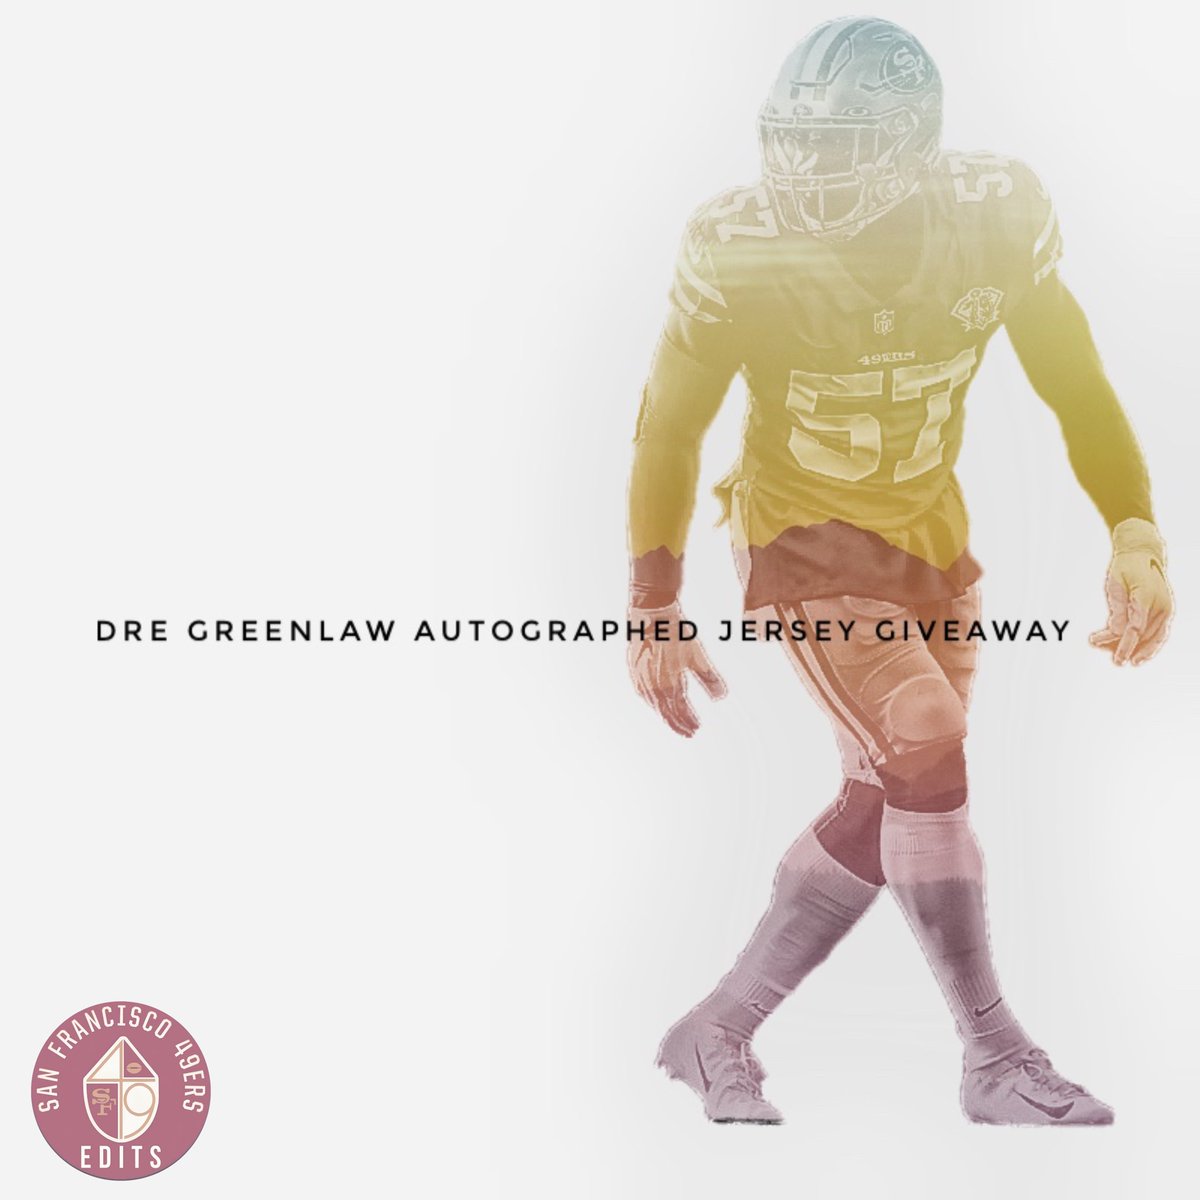 To celebrate week 3 and a throwback uniform game, we are giving away an autographed Dre Greenlaw home throwback jersey. Must follow, like and retweet to enter. Winner will be announced VIA TWEET after the #49ers Thursday night football game . #FTTB   #NFL #Giveaway #Niners